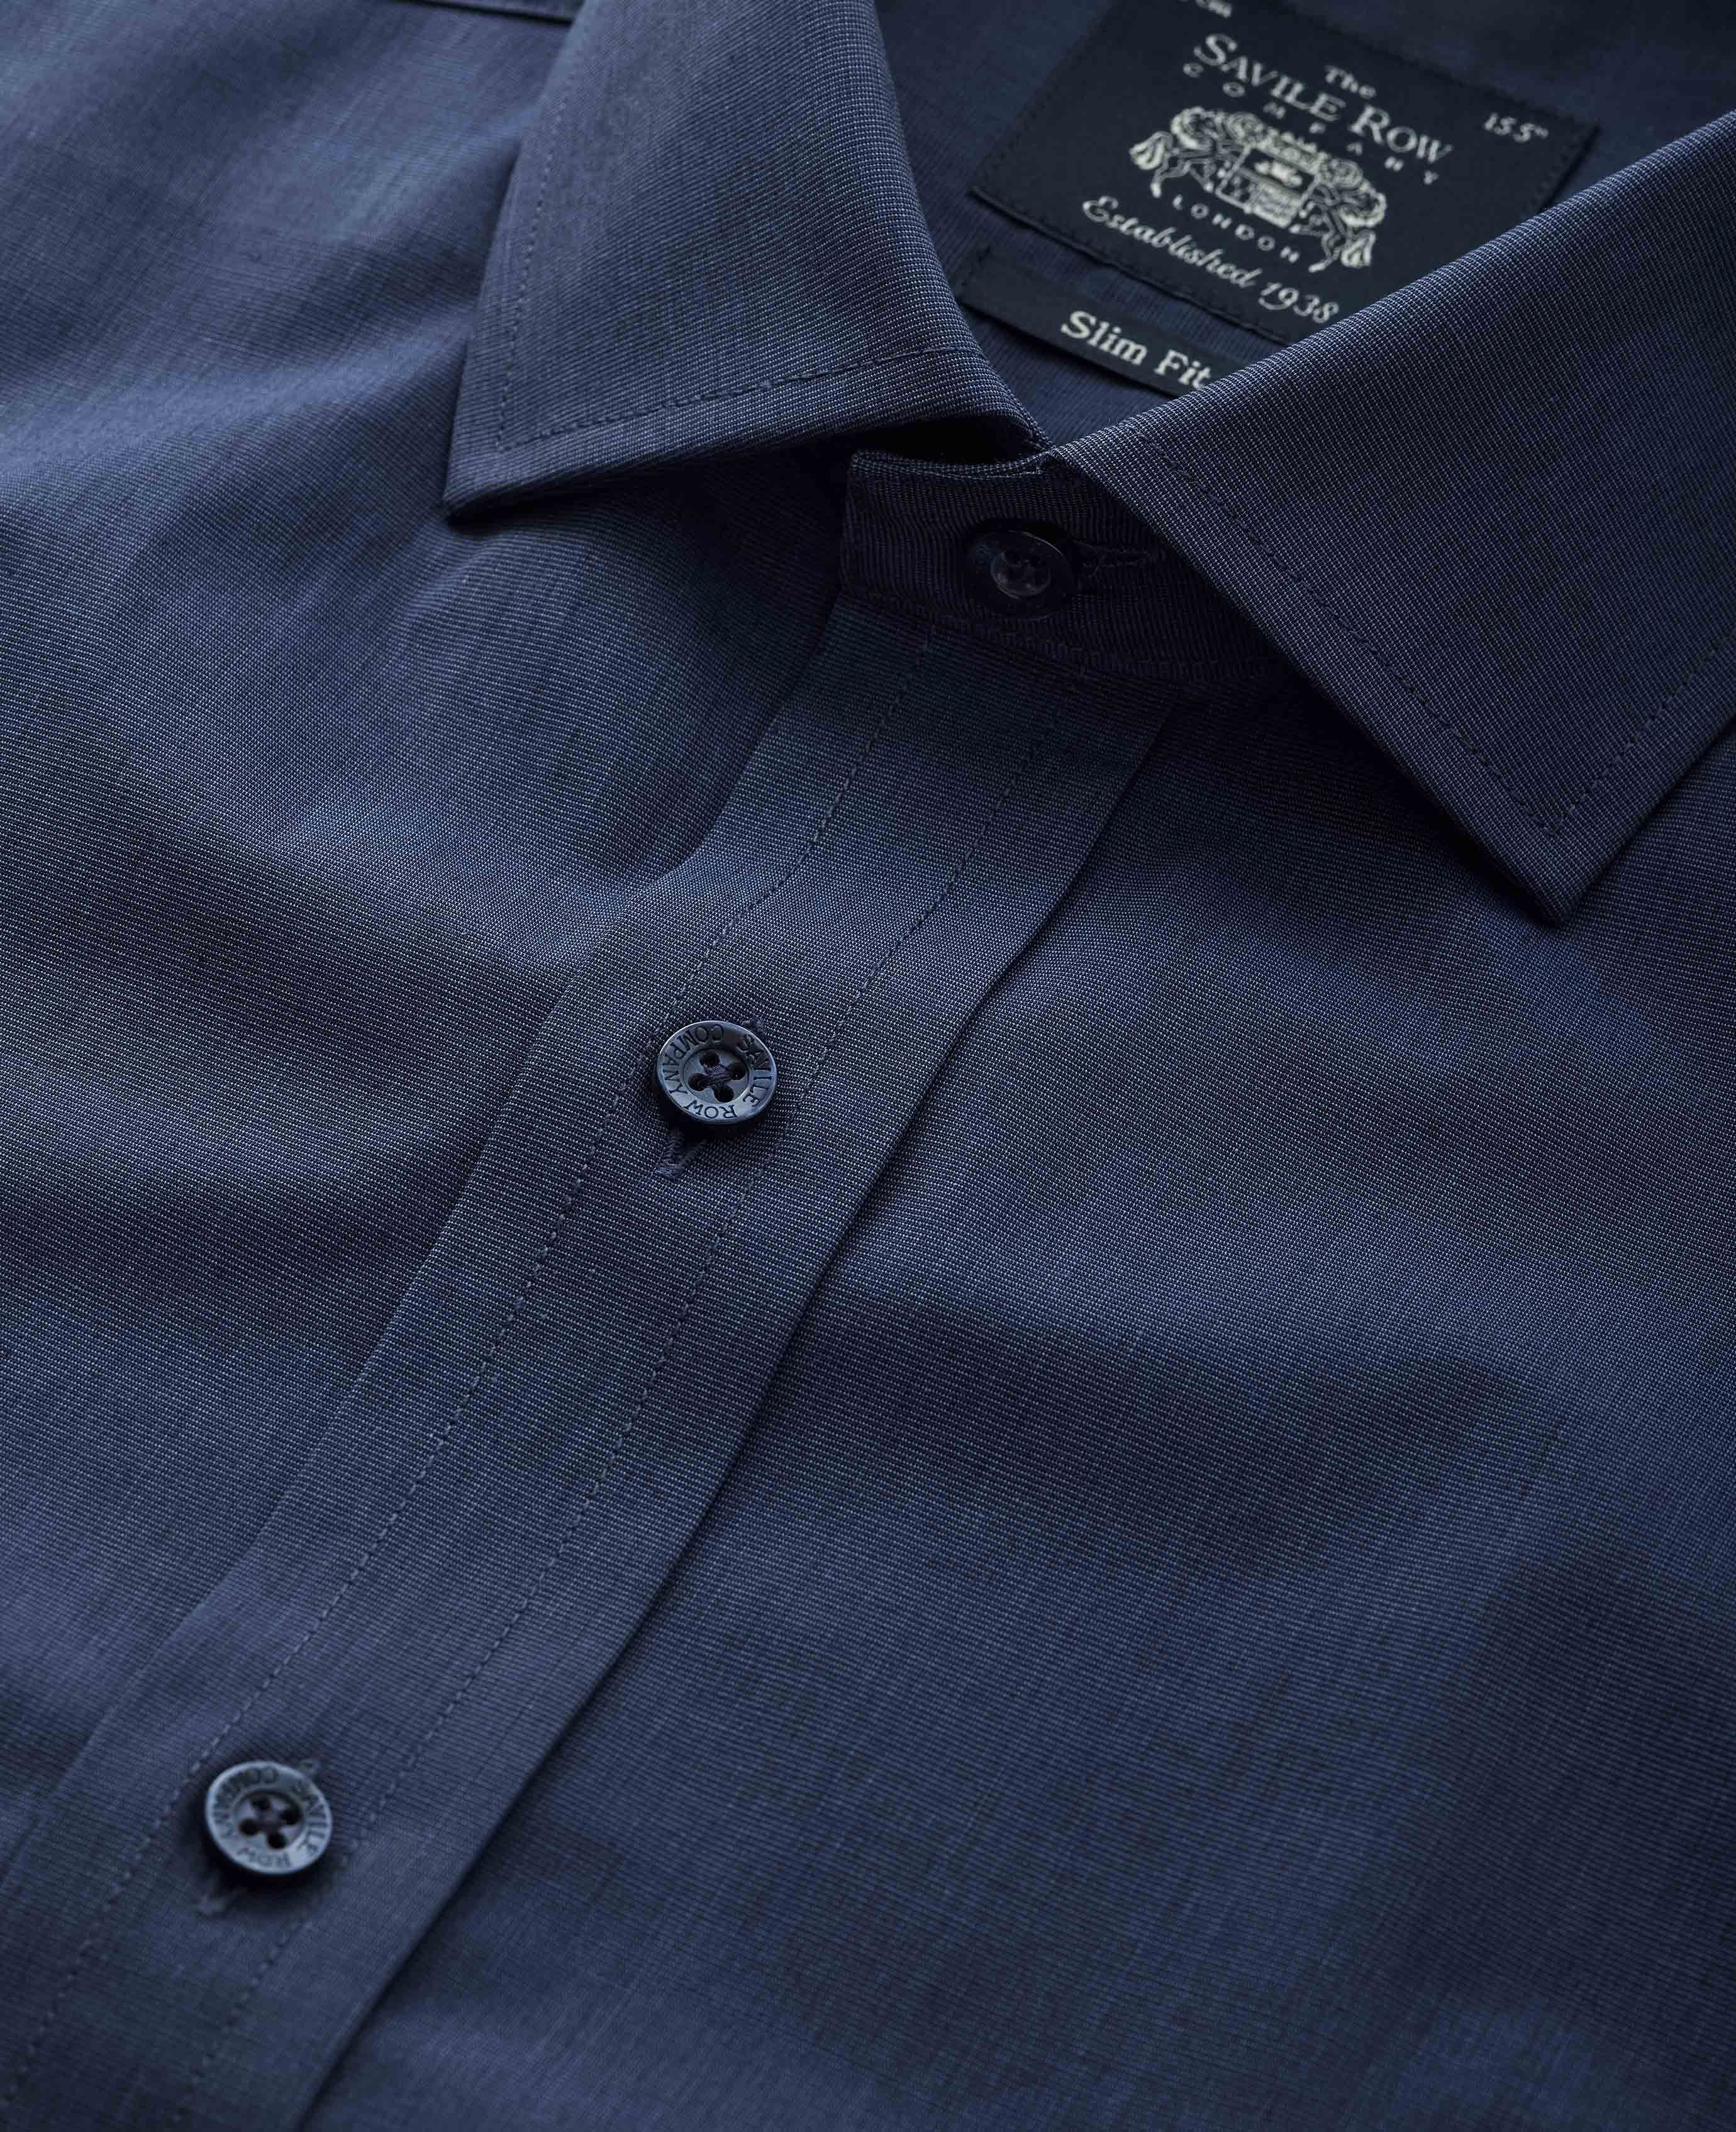 Men's End on End Slim Fit Shirt in Navy | Savile Row Co